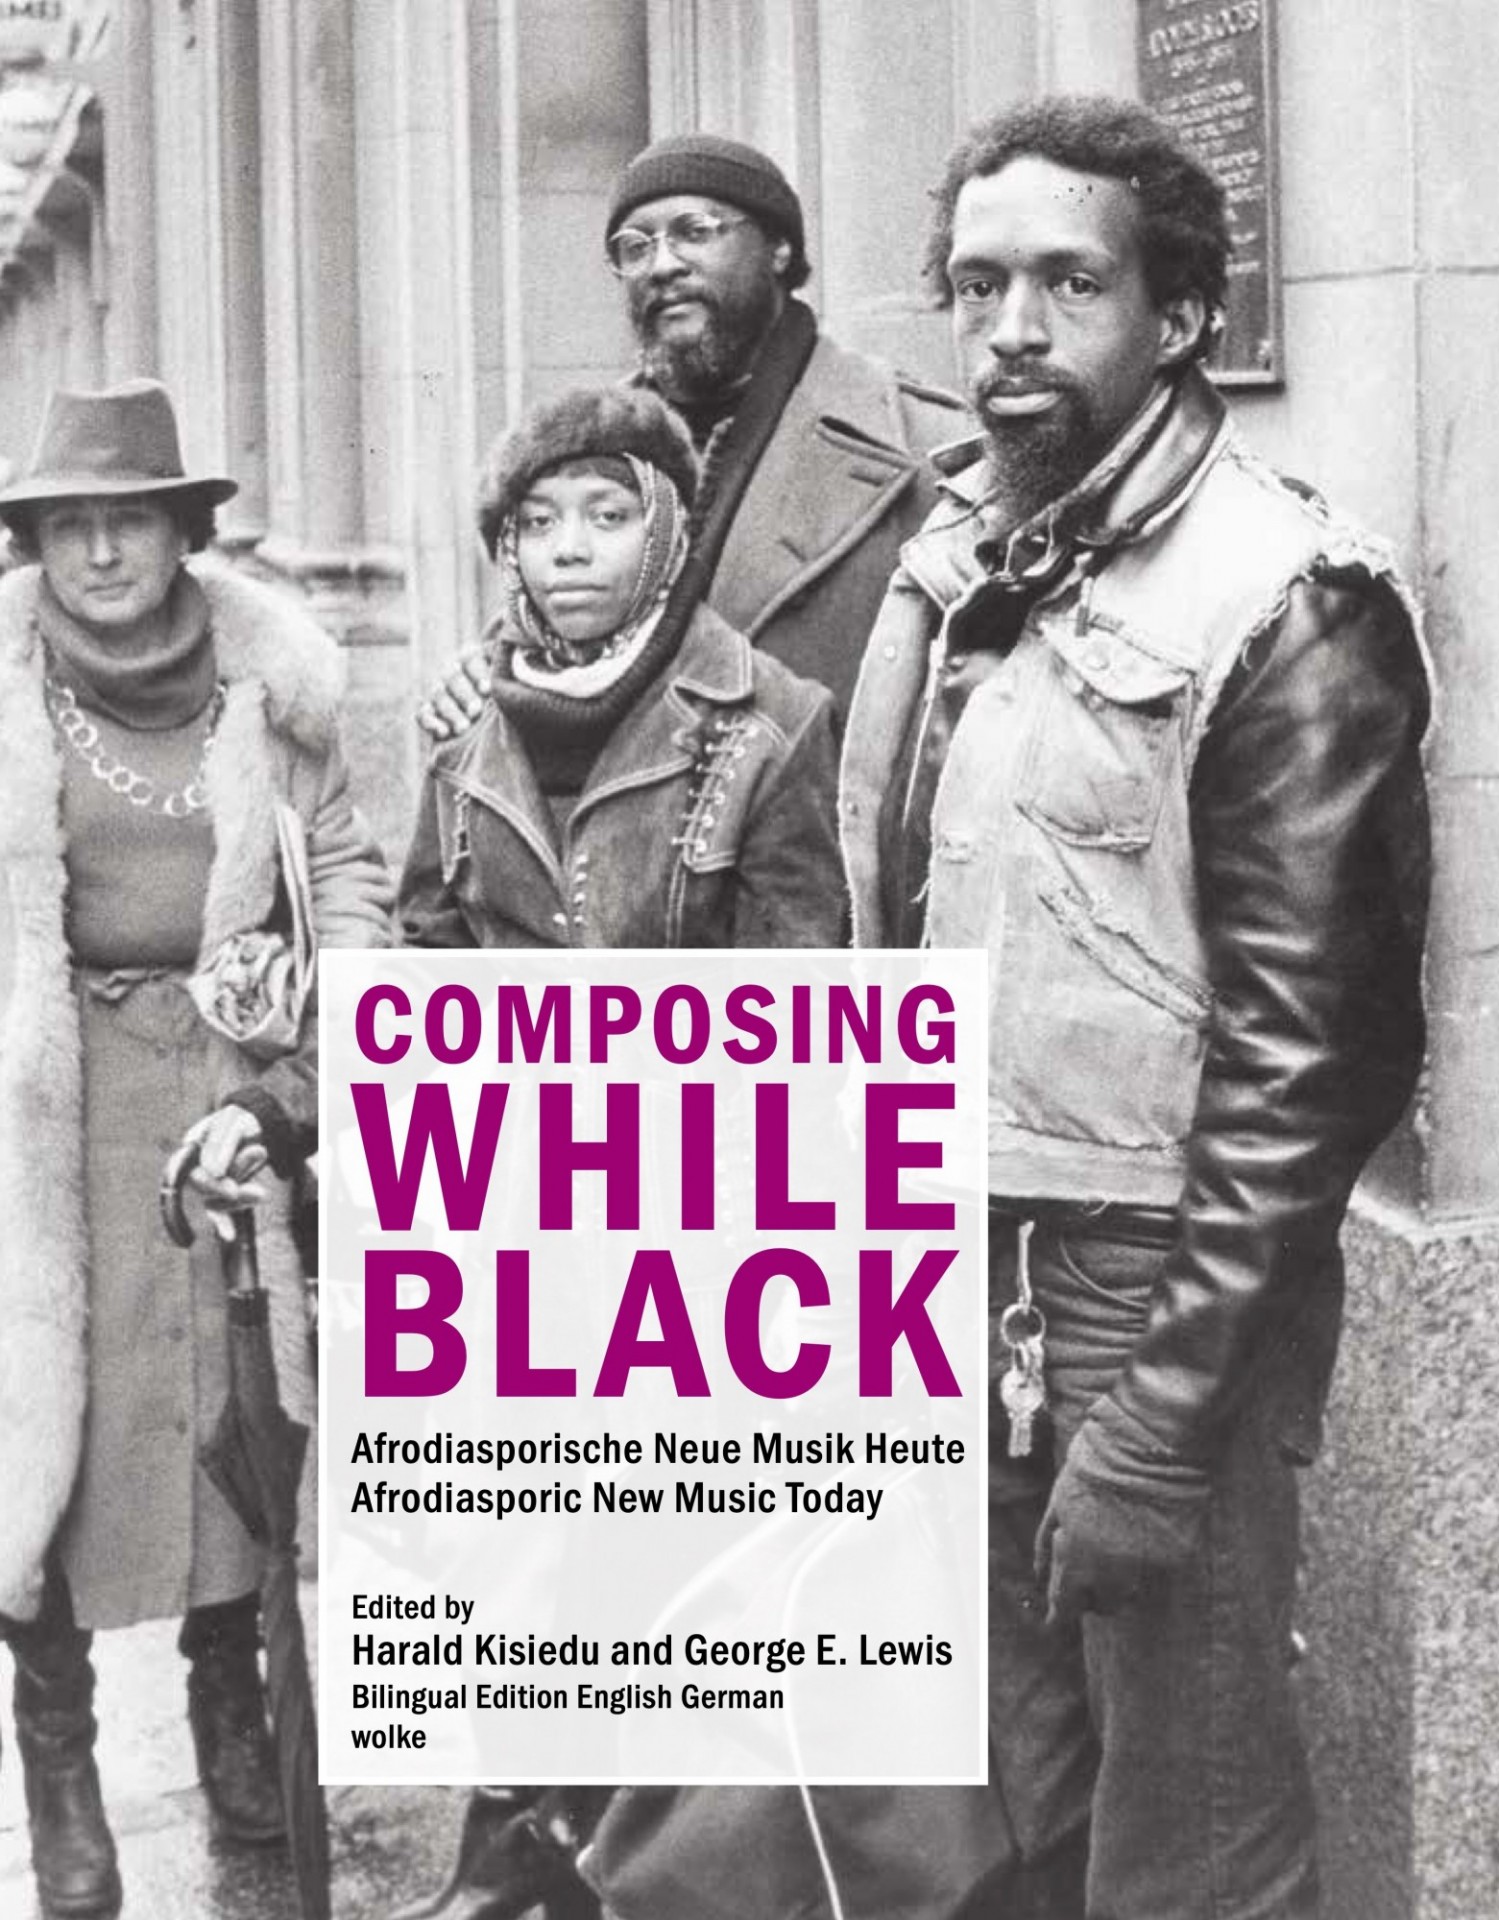 Picture of Dr. Harald Kisiedu and Professor George Lewis' Bilingual Edited Volume on Afrodiasporic Composers